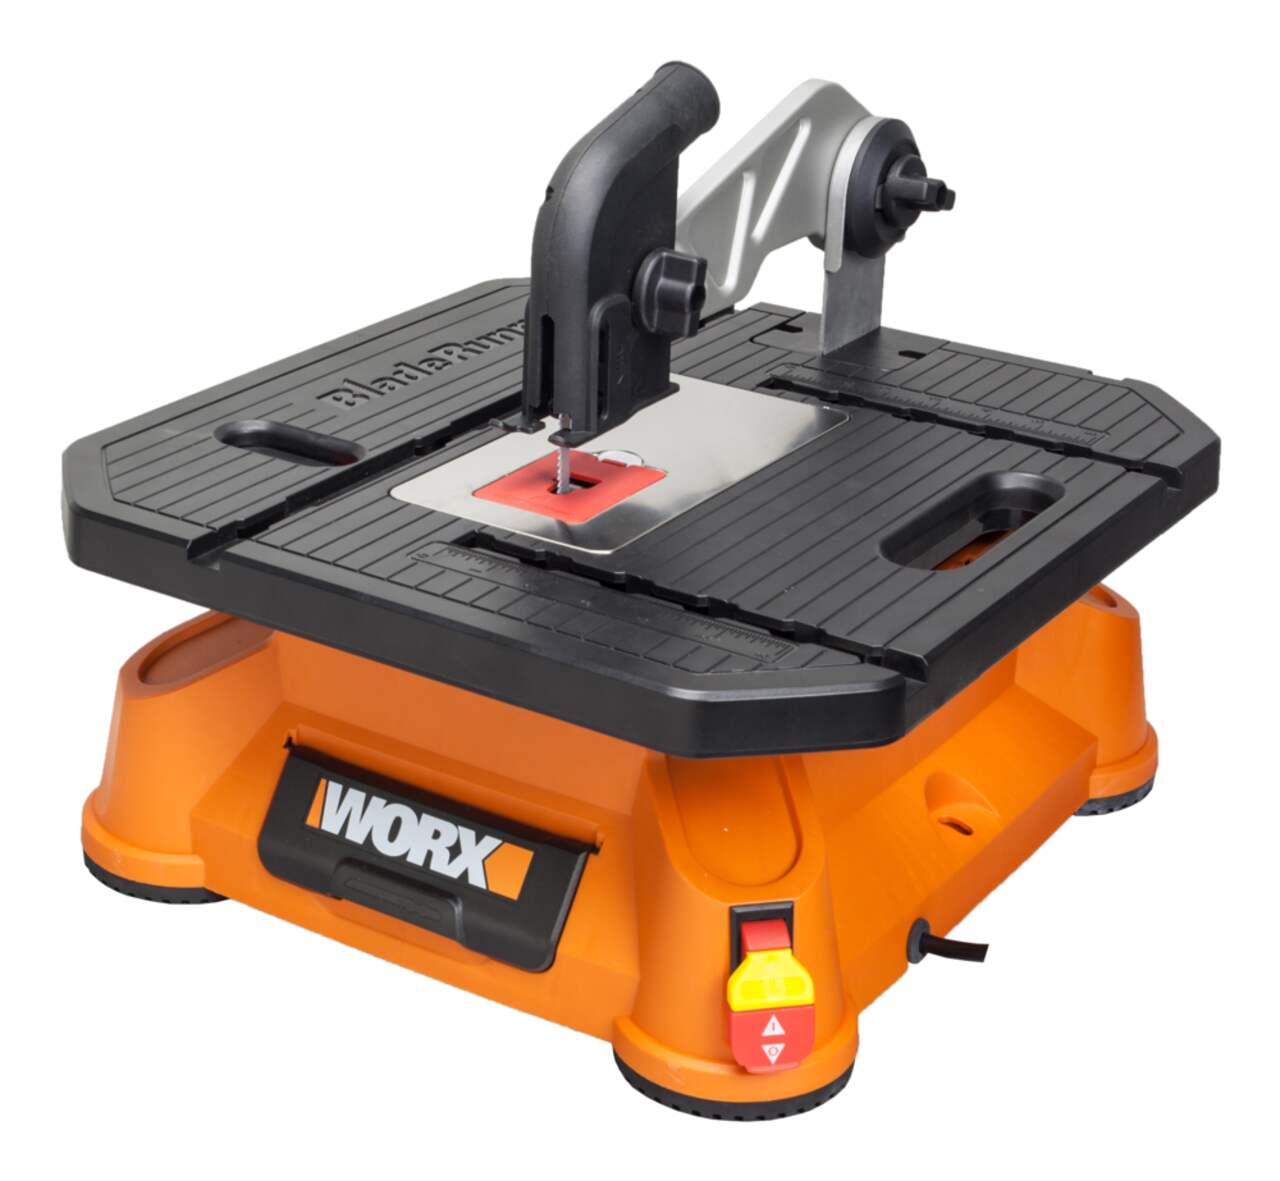 https://media-www.canadiantire.ca/product/fixing/tools/portable-power-tools/0547949/worx-5-5a-bladerunner--3636fcac-41a4-4ce4-a9ee-6de7ec1e4211.png?imdensity=1&imwidth=640&impolicy=mZoom